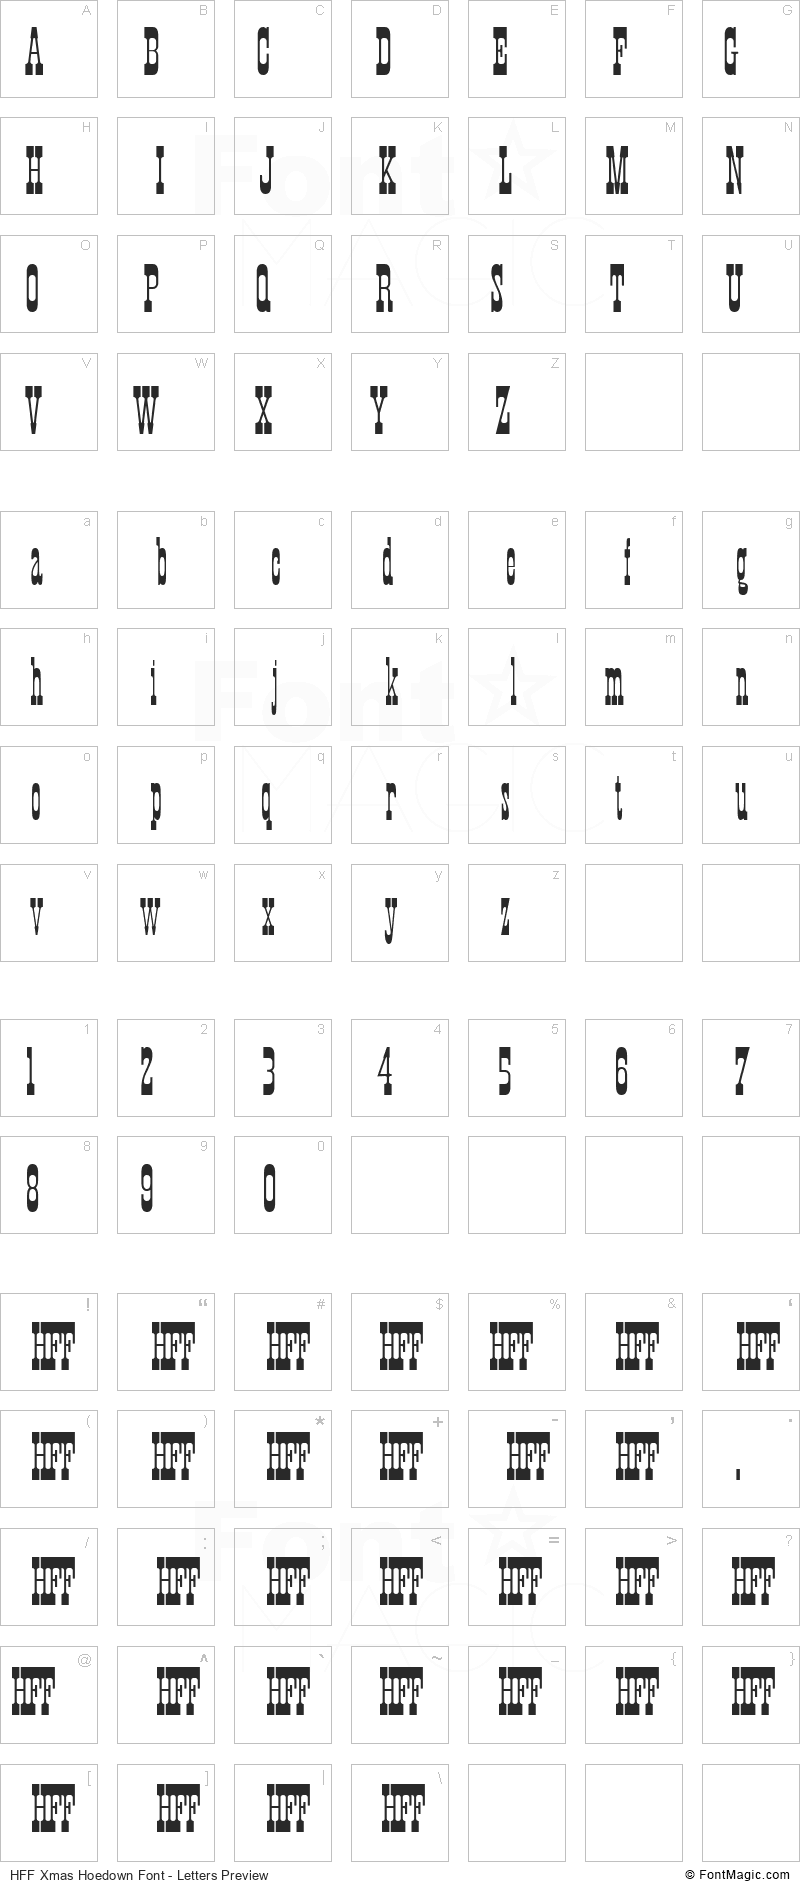 HFF Xmas Hoedown Font - All Latters Preview Chart